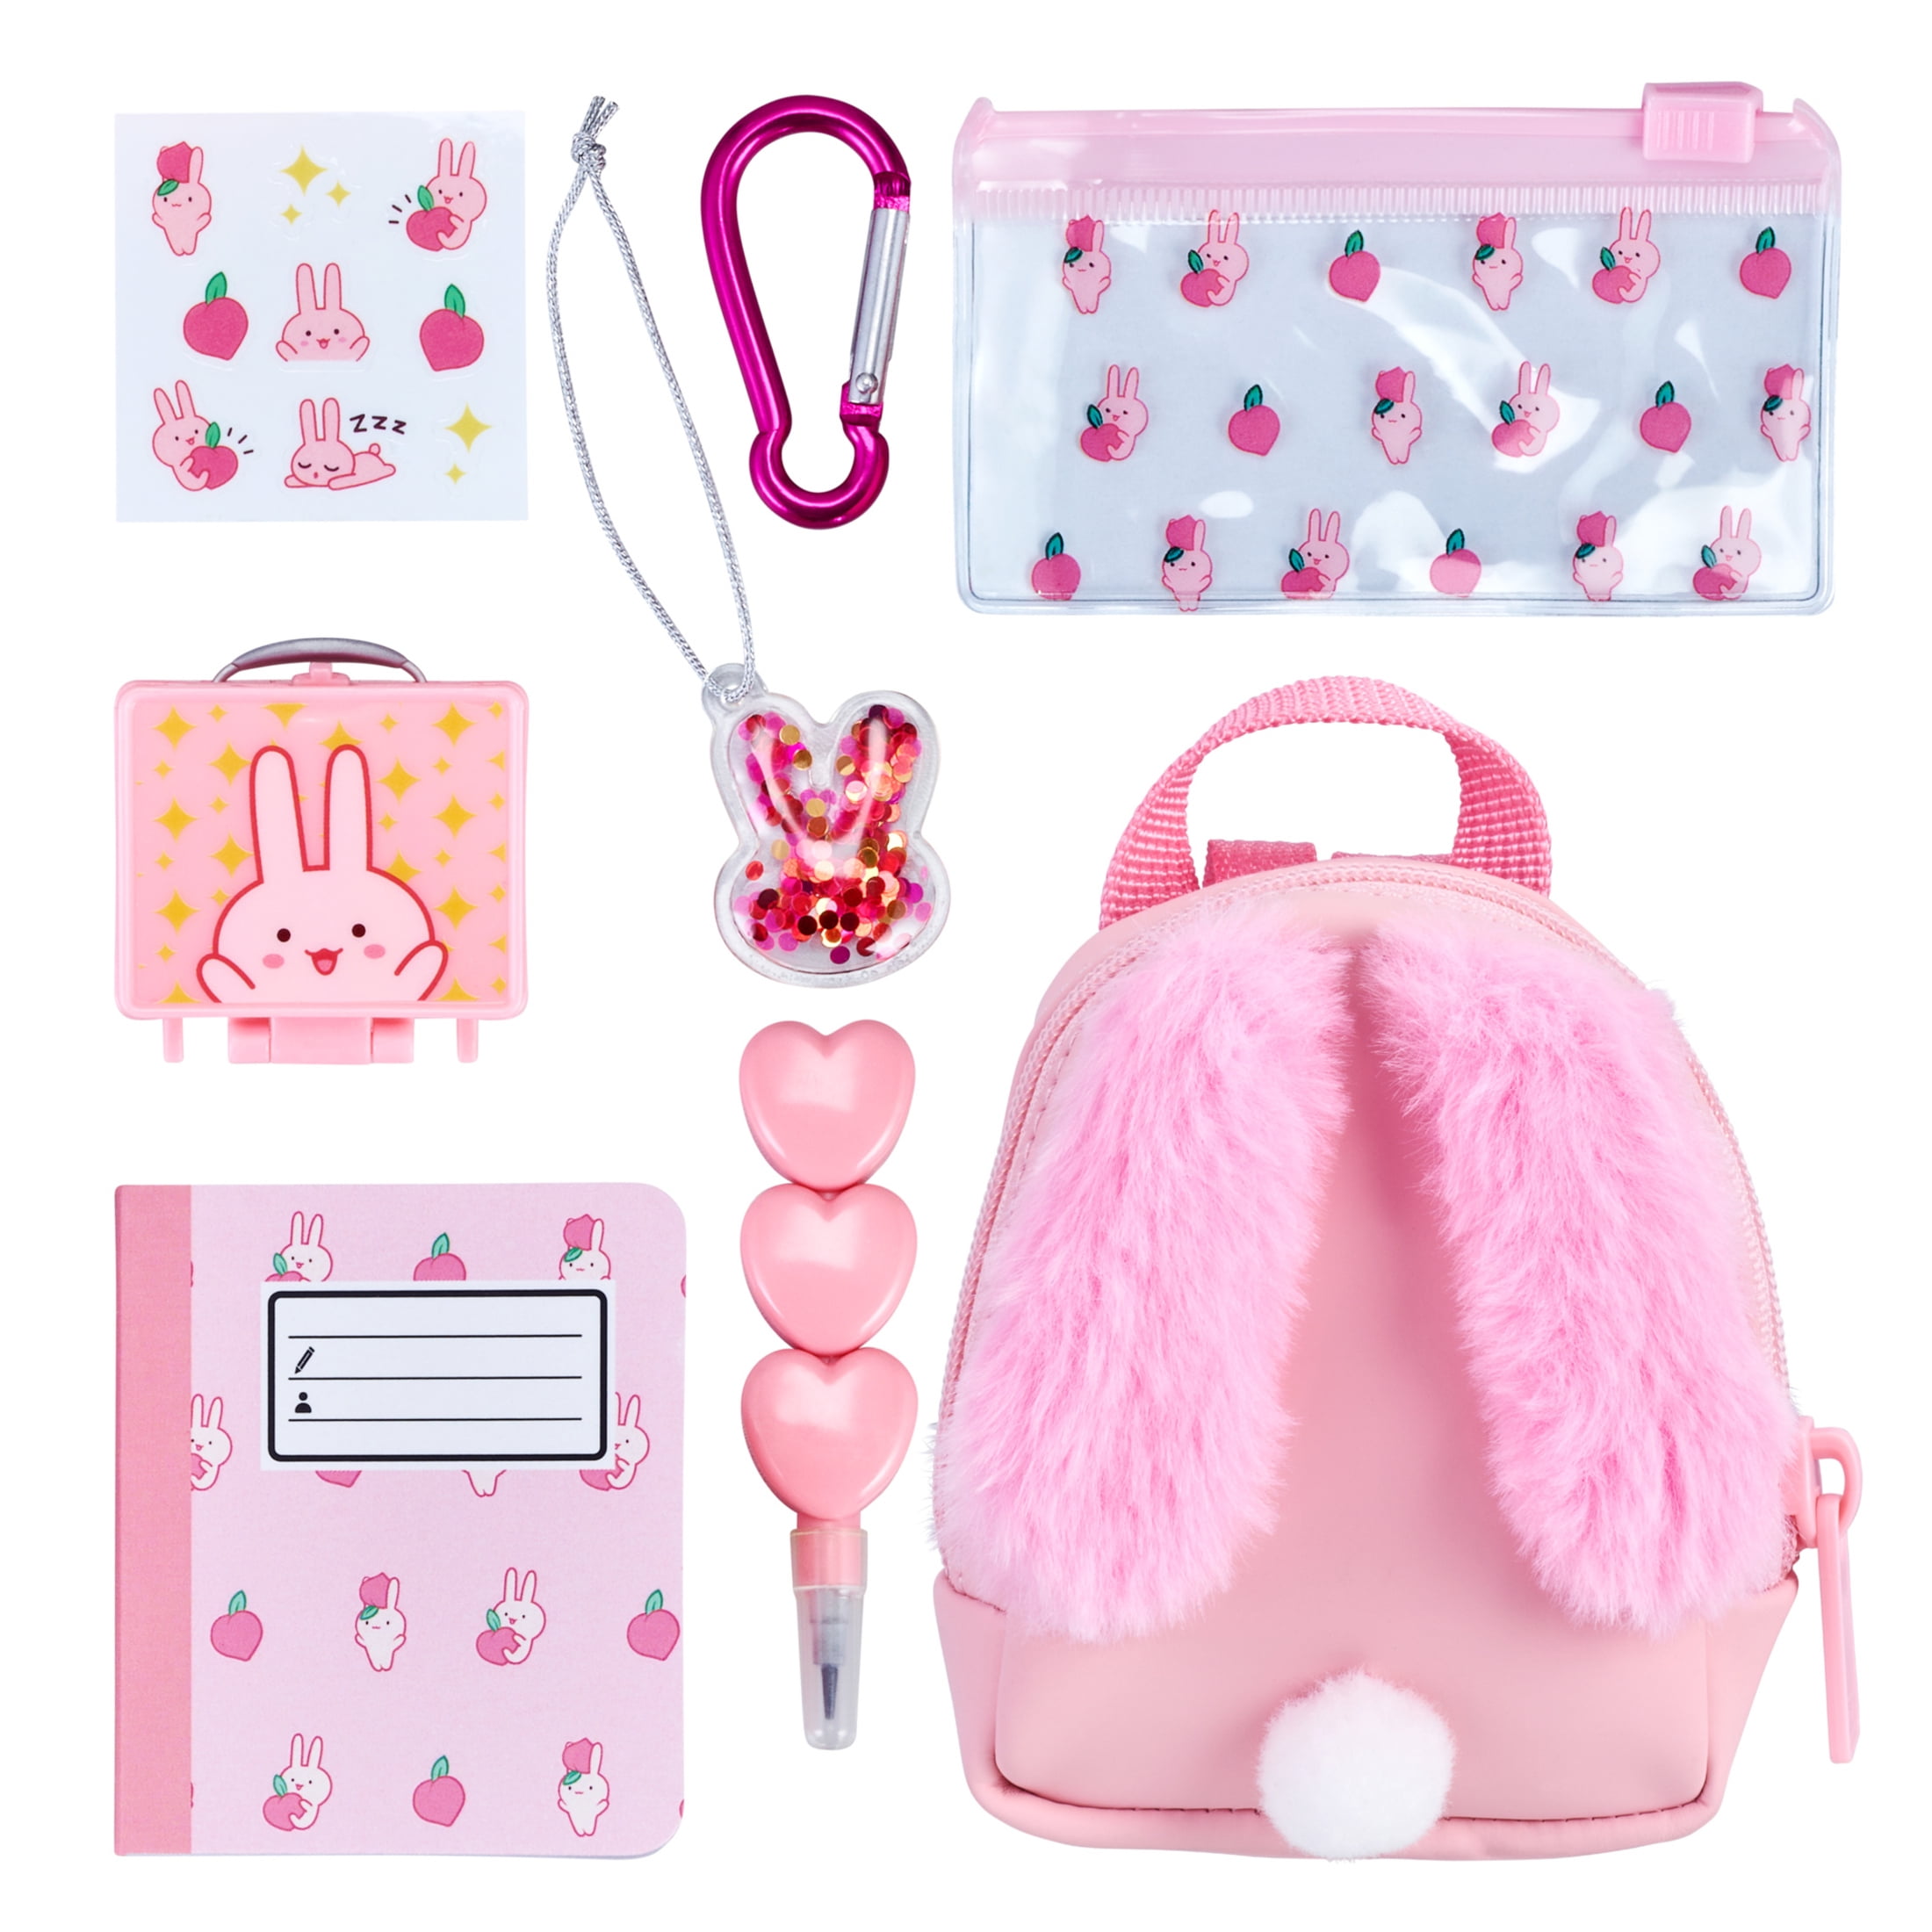 Real Littles Handbags with Gosutoys Stickers